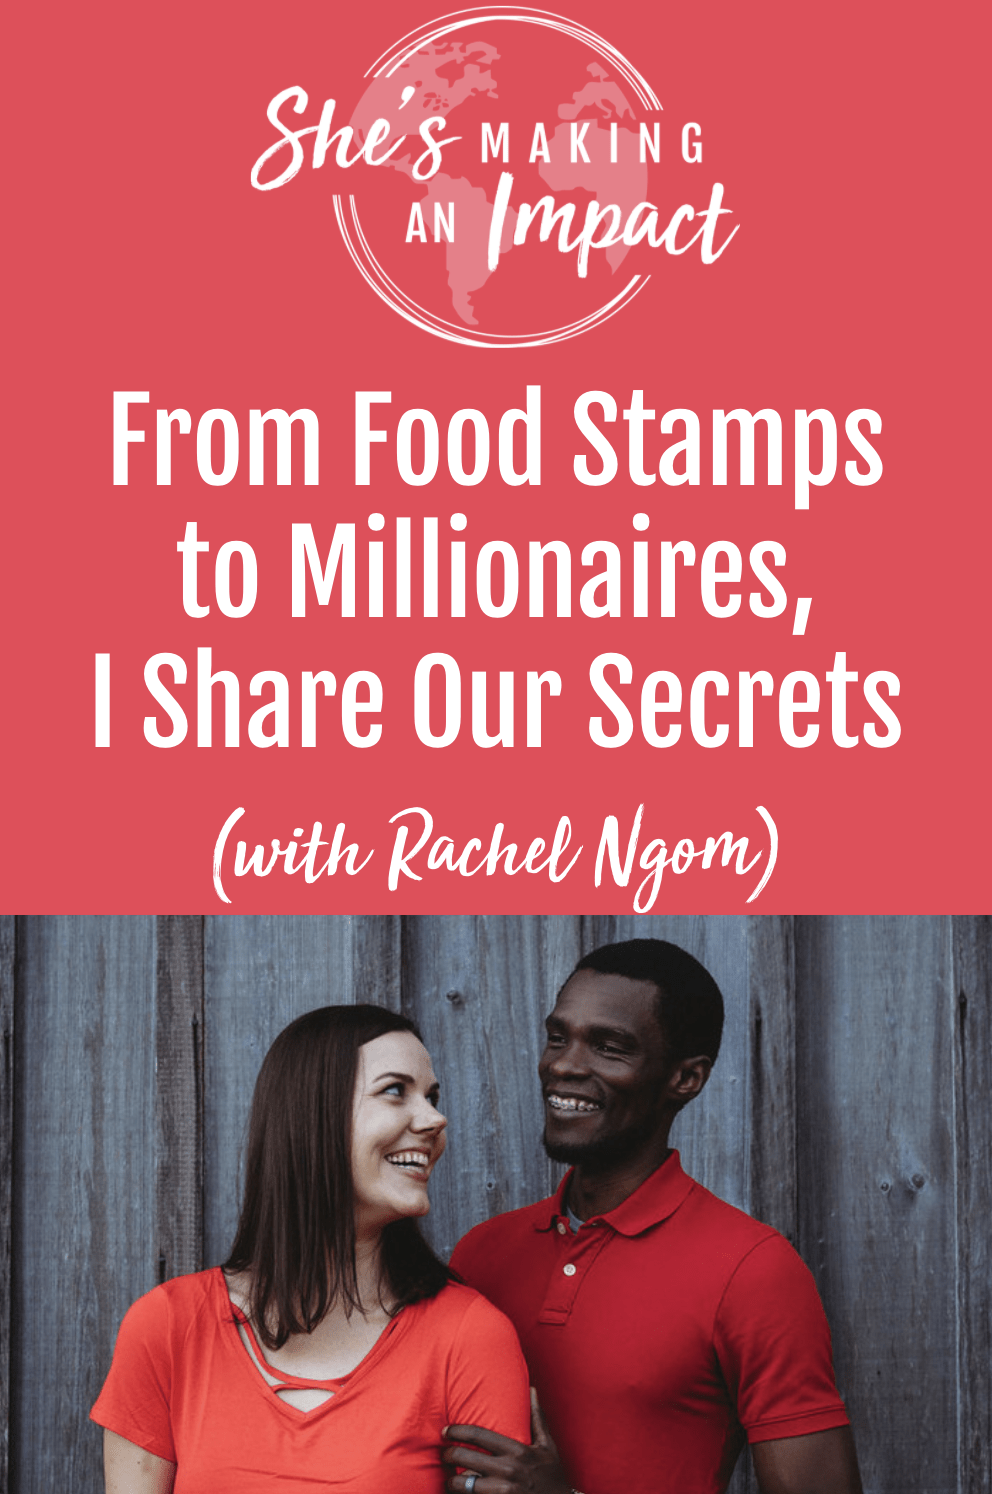 From Food Stamps to Millionaires, I Share Our Secrets: Episode 310